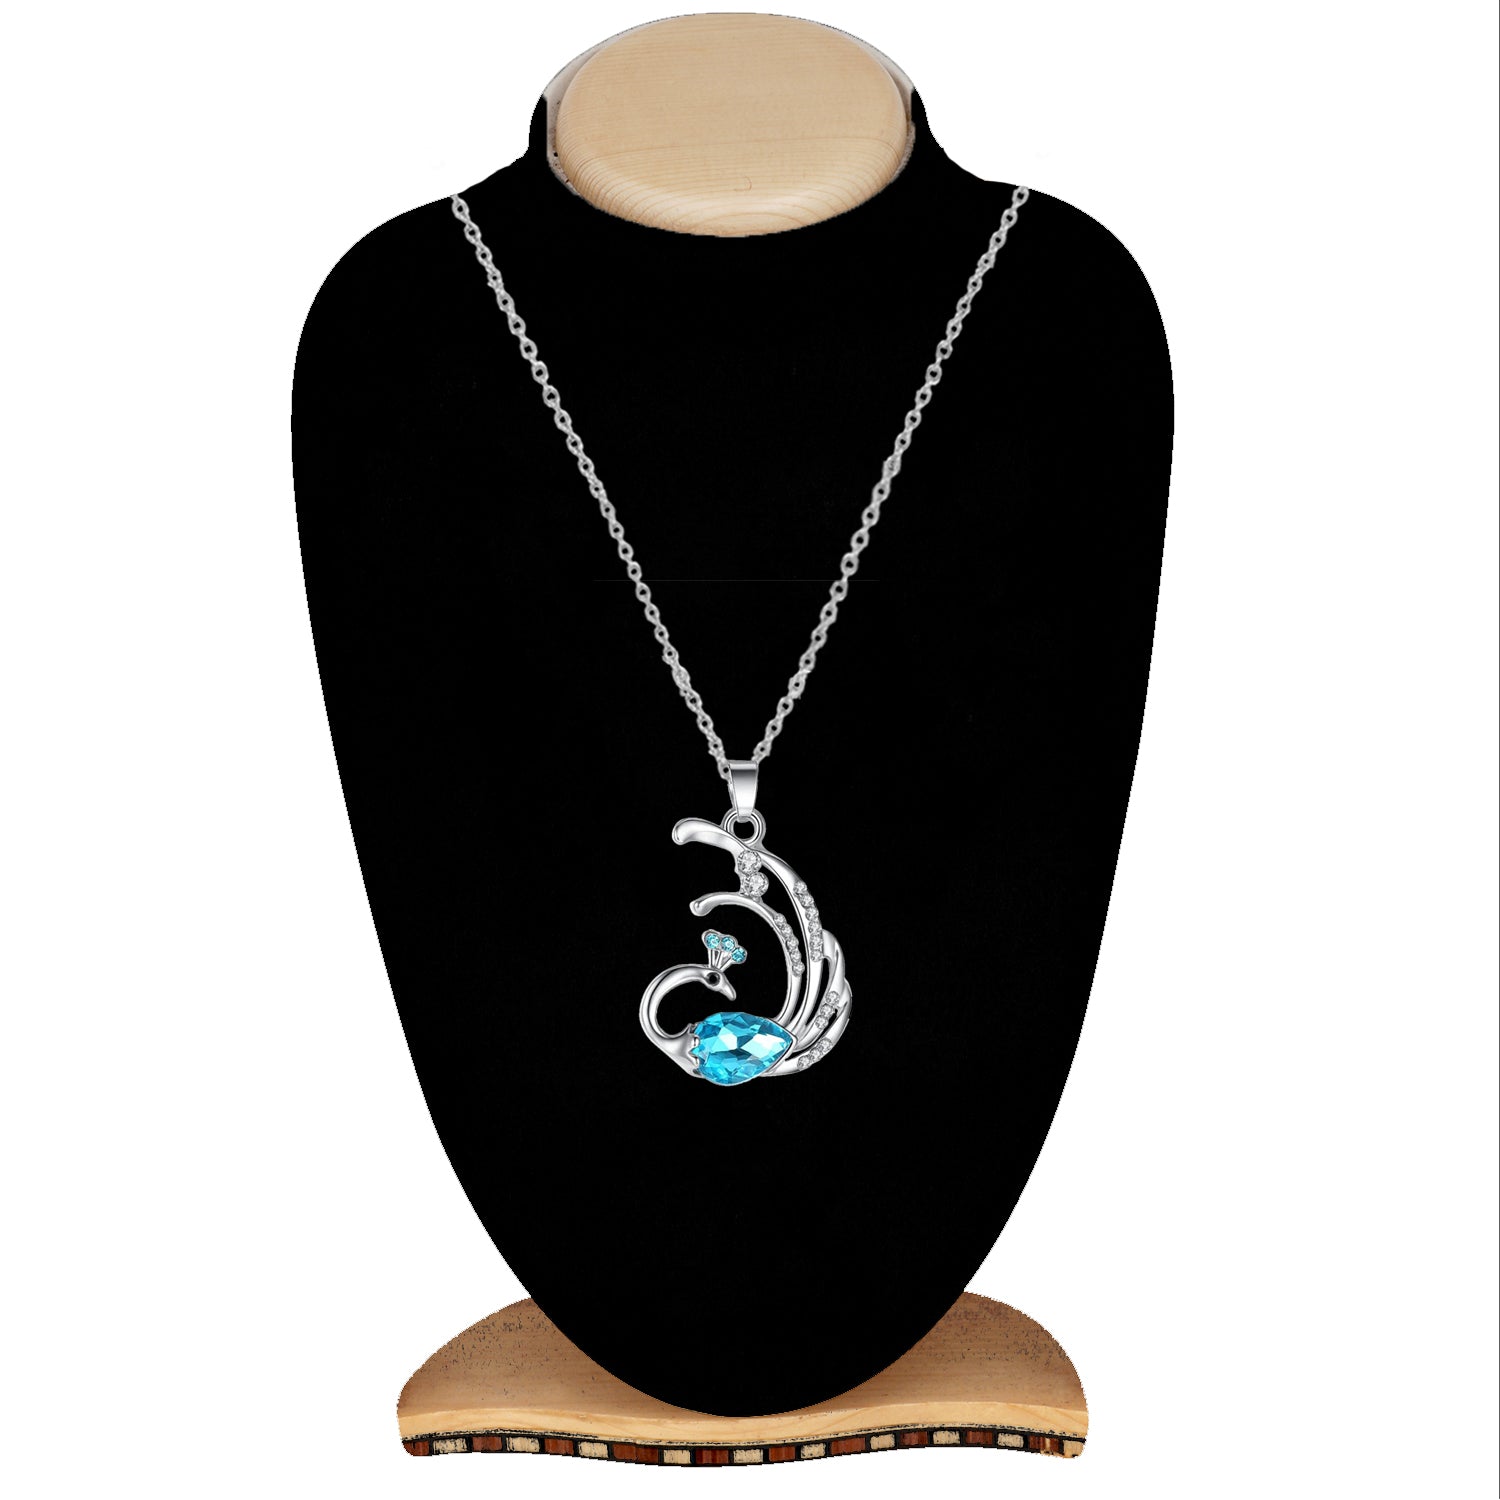 Dancing Peacock-Shaped Pendant Necklace